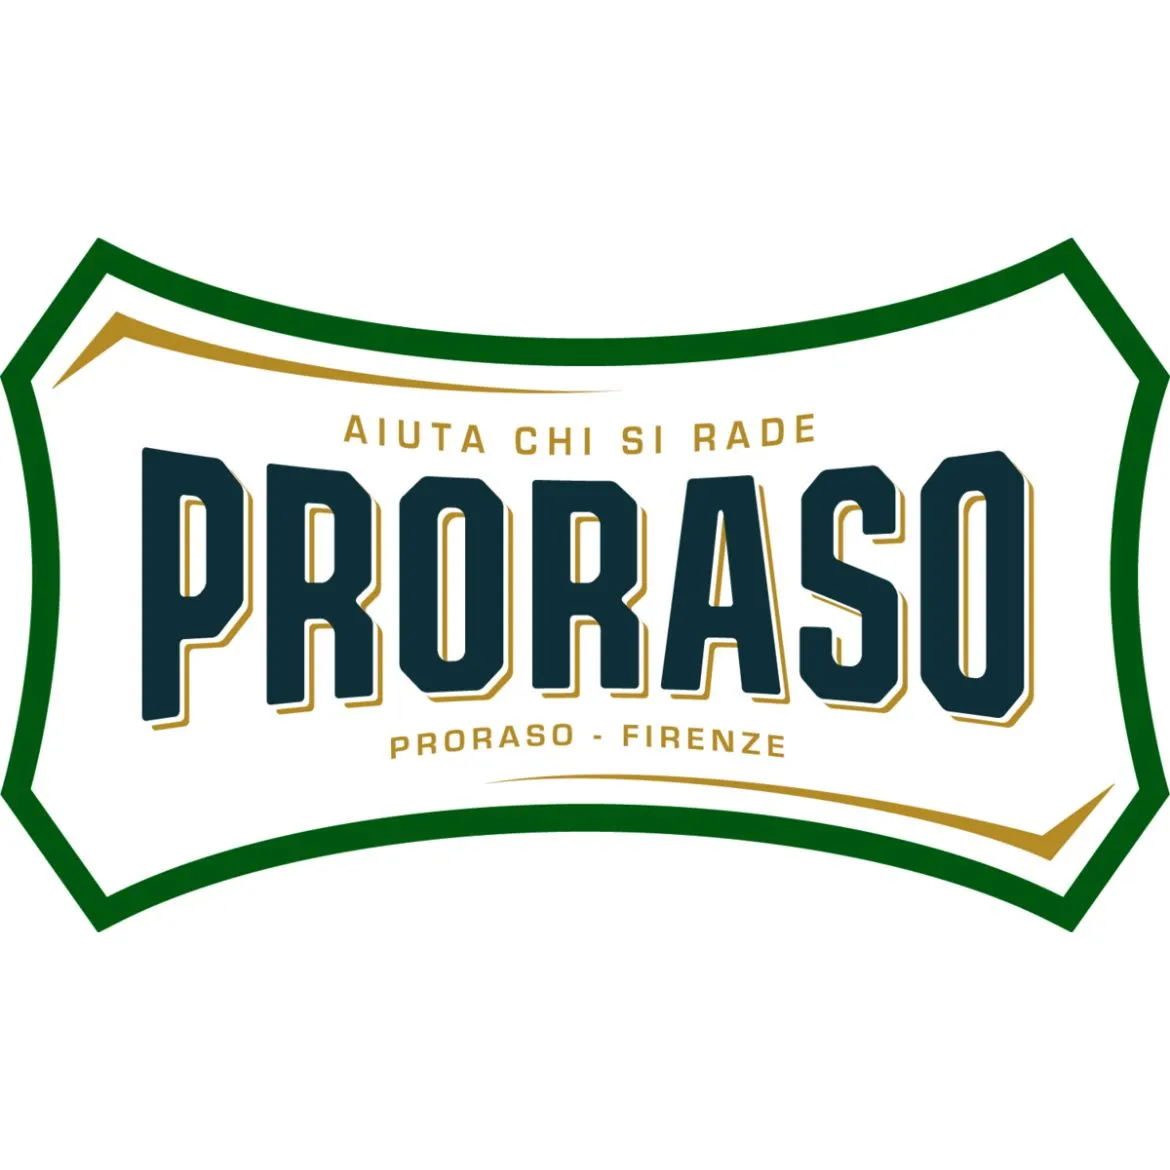 Proraso Professional Shaving Products